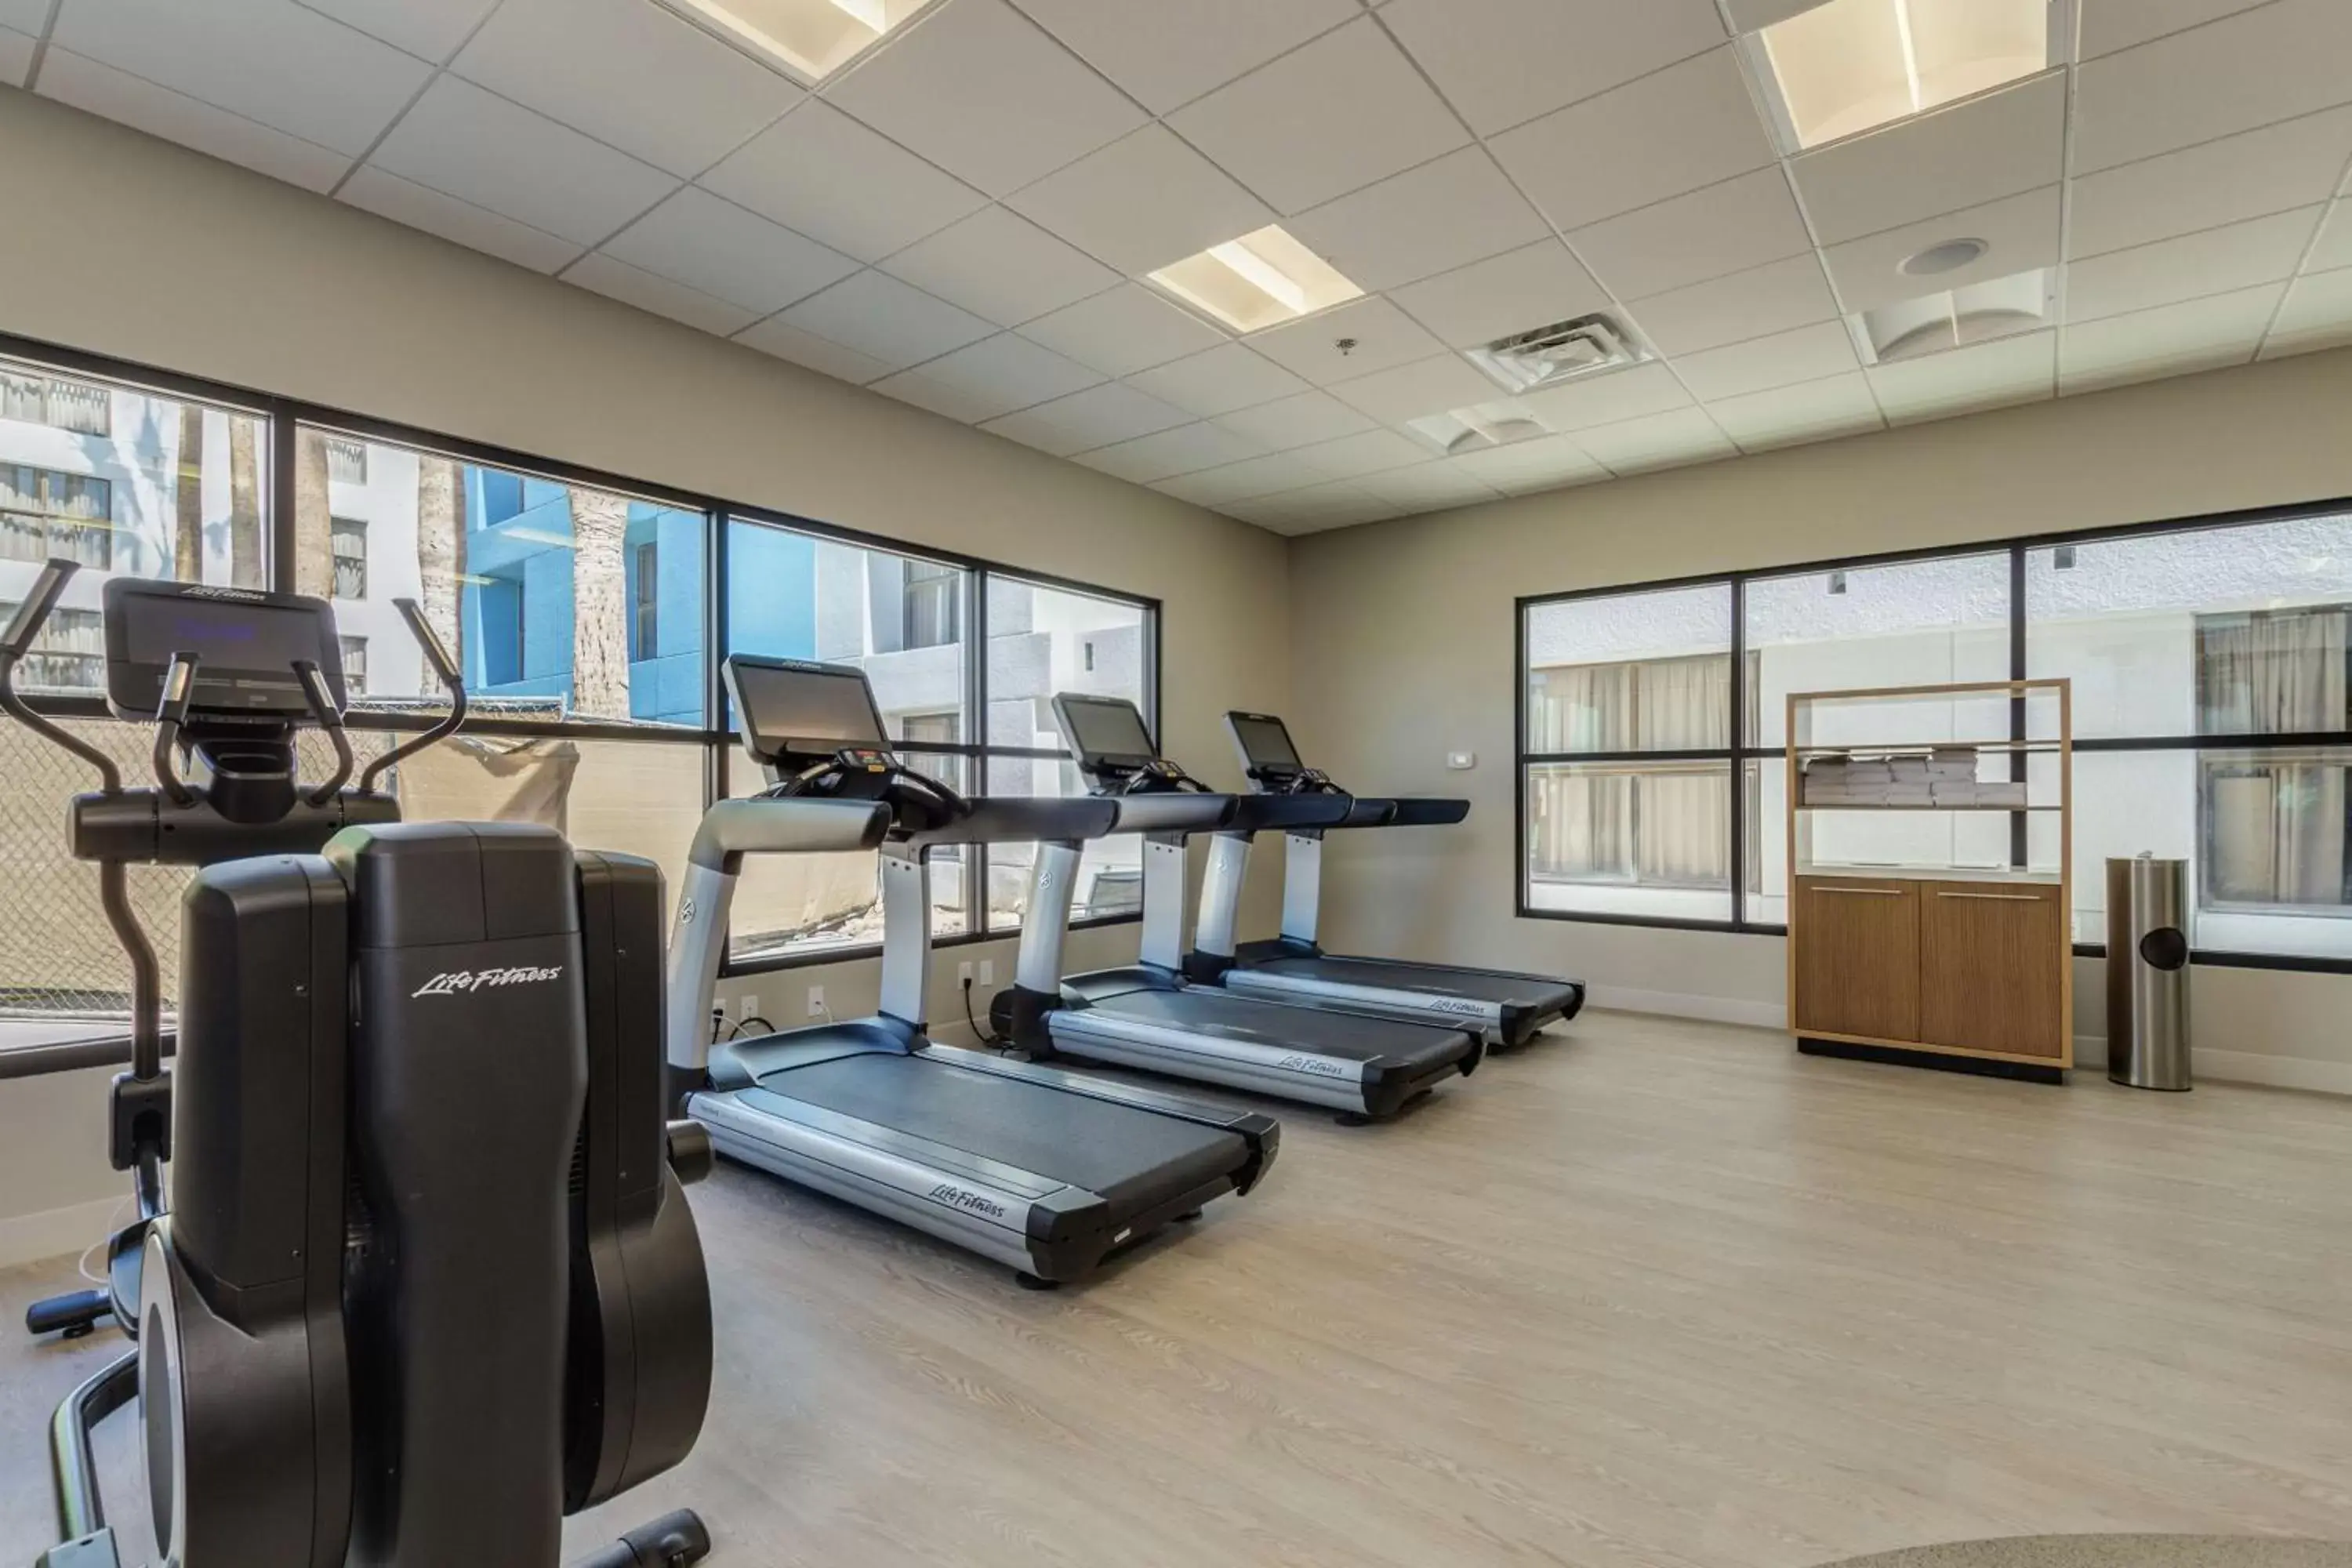 Fitness centre/facilities, Fitness Center/Facilities in DoubleTree by Hilton Chandler Phoenix, AZ